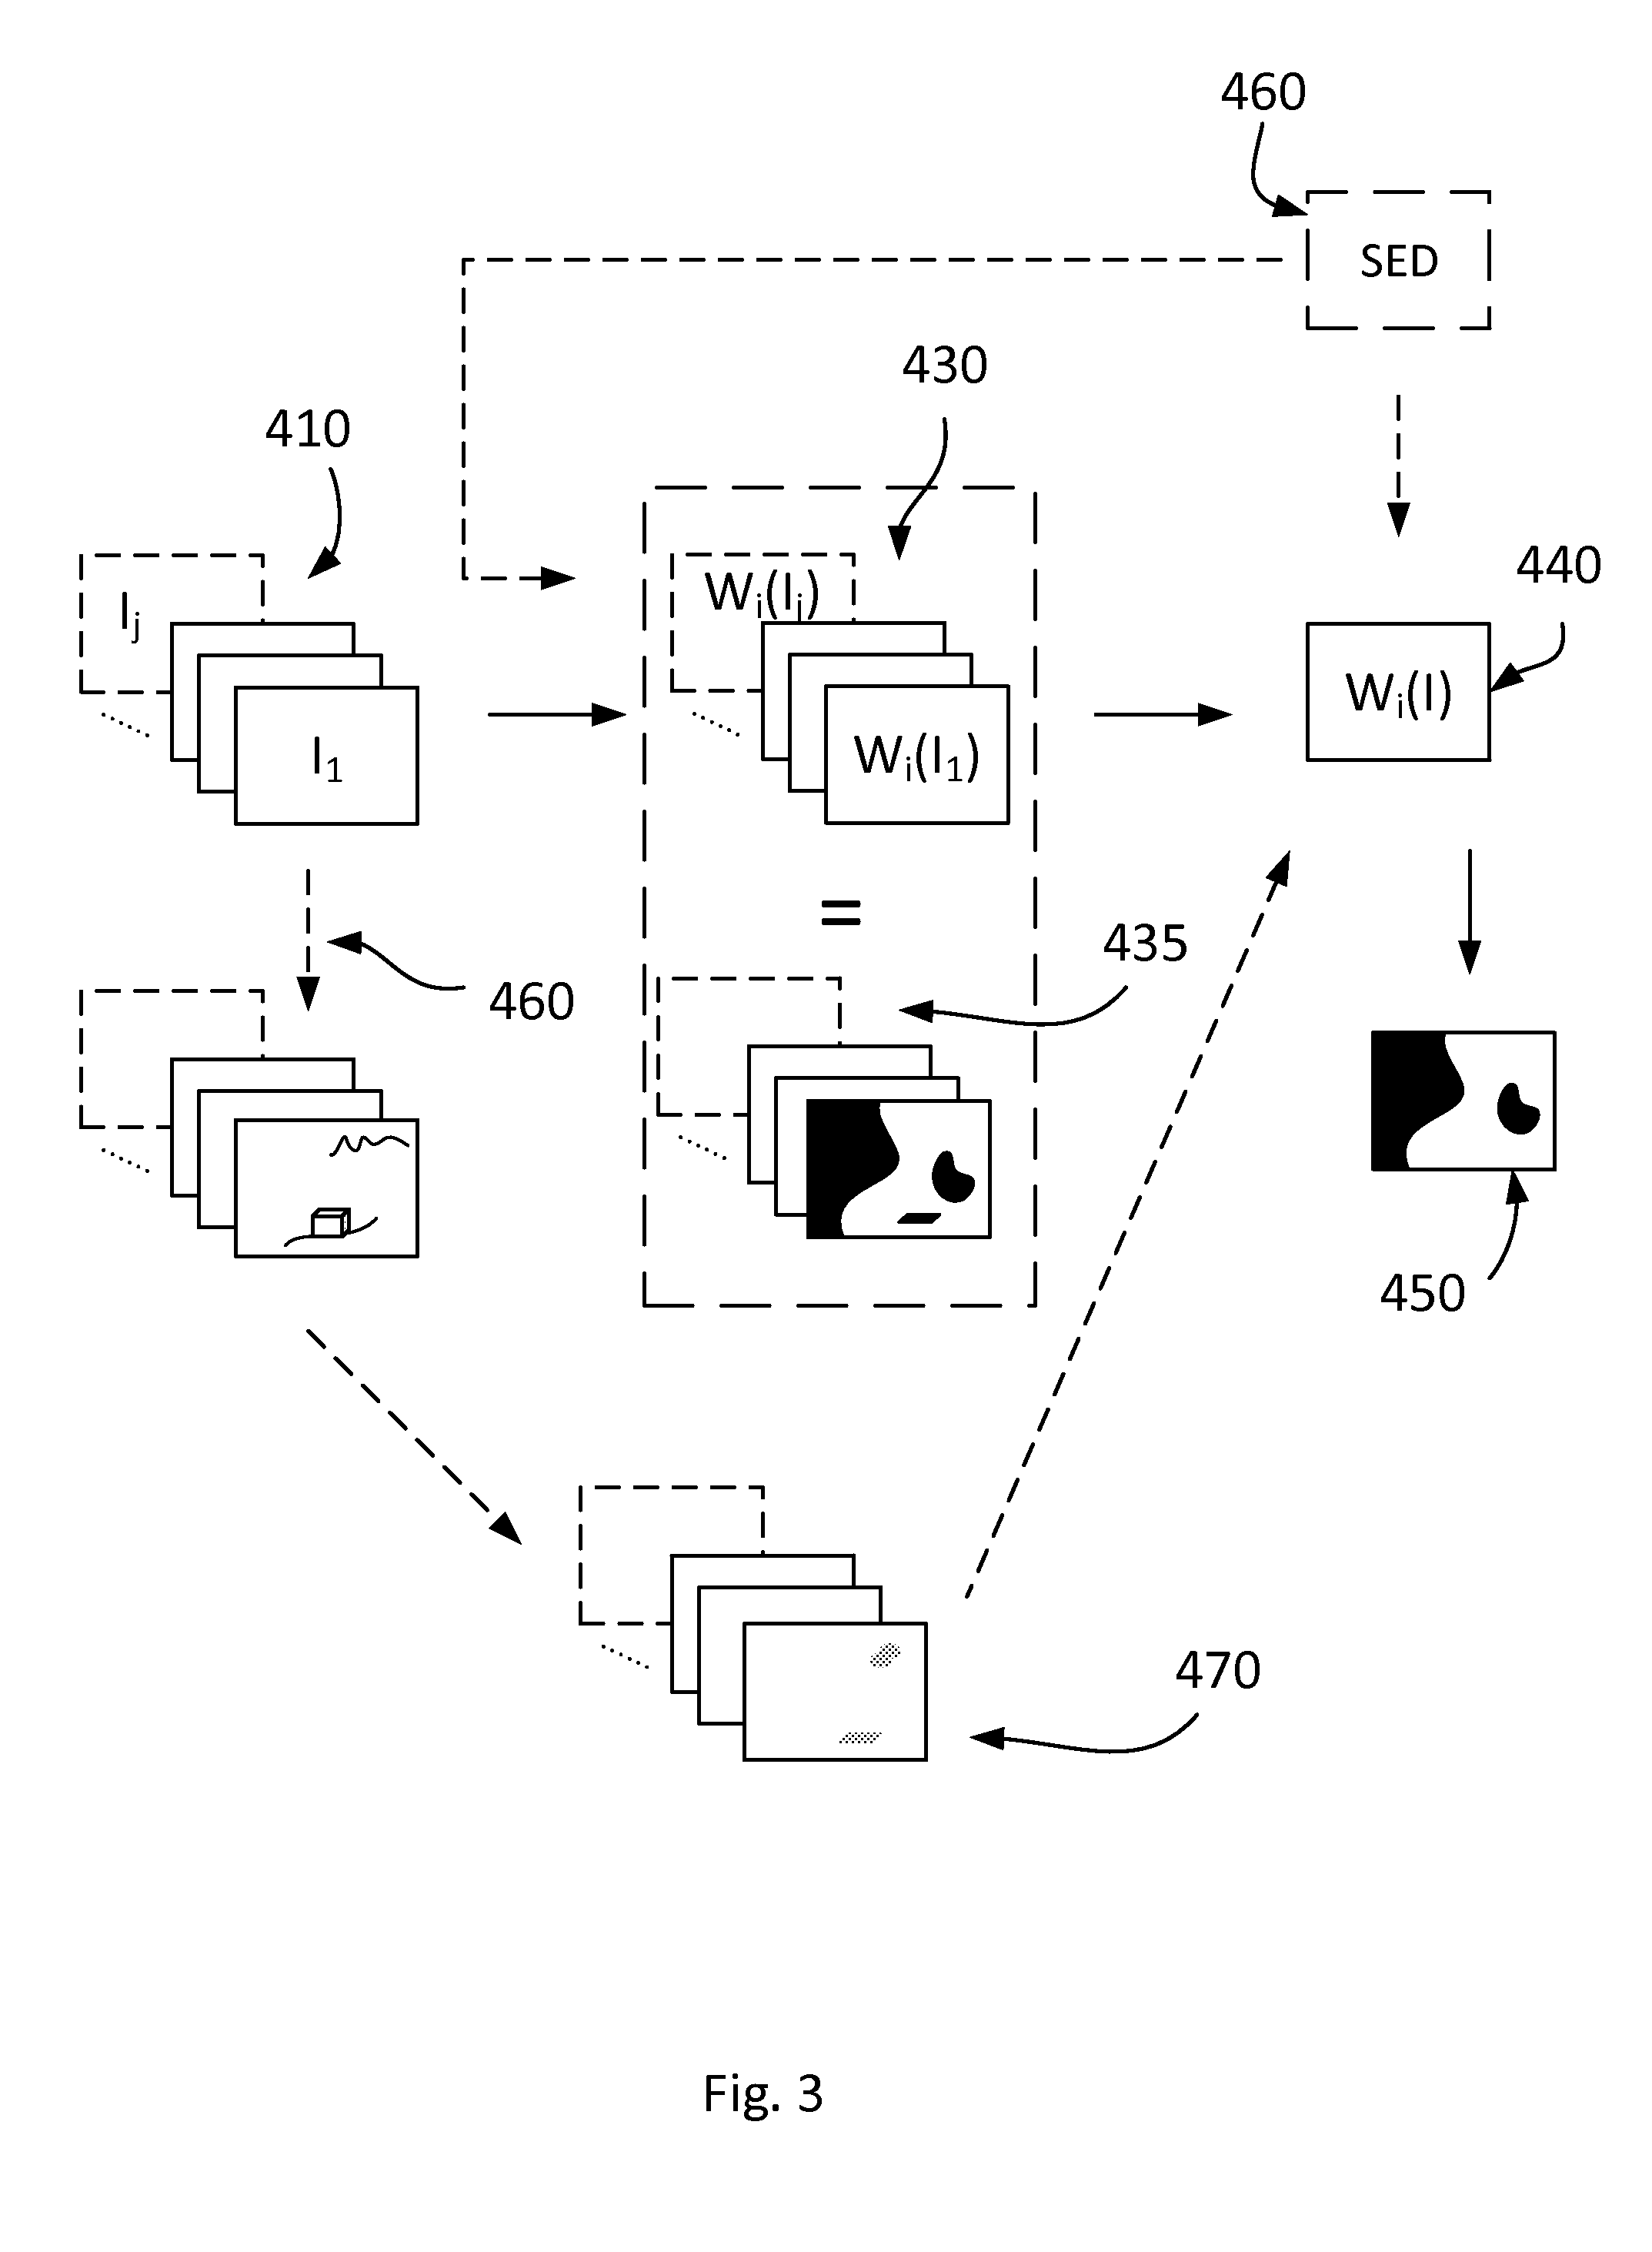 Method and system for classifying a terrain type in an area